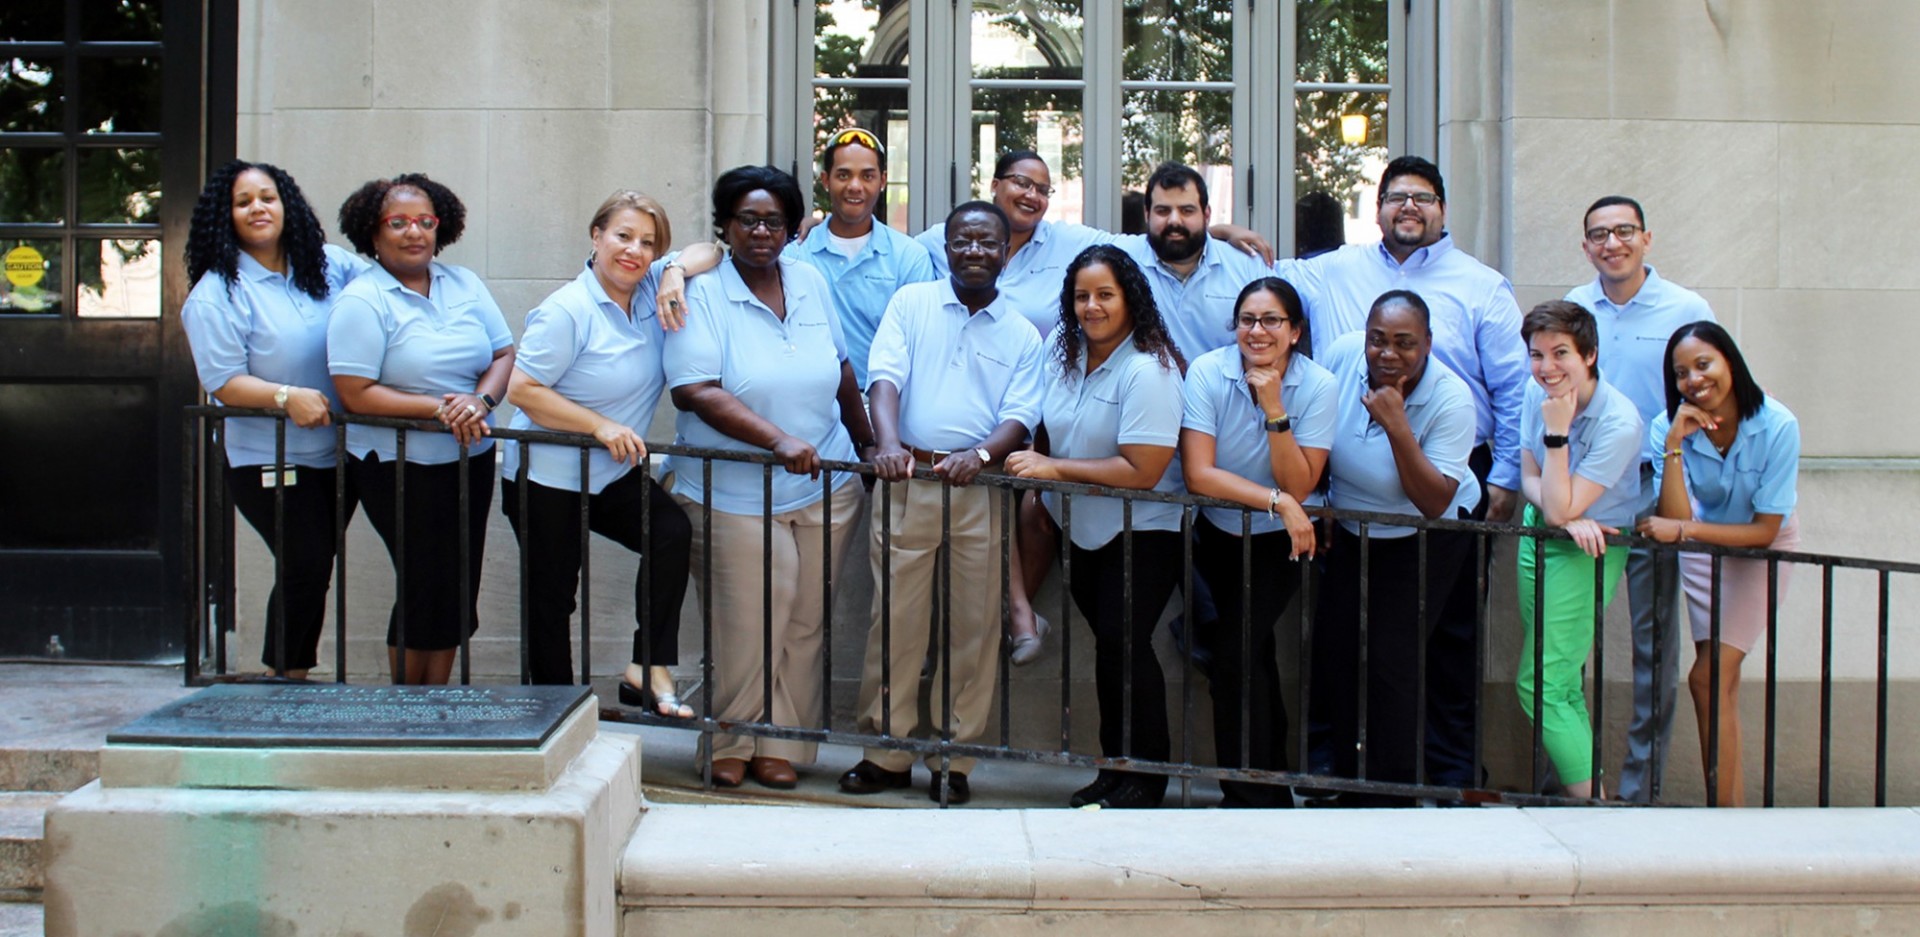 The Hospitality Desk team is available all day and all night to support residential undergraduates in Columbia College and SEAS.  Front, left to right: Livanessa Garcia, Wanda Suero, Angie Sanabria, Jane Hutchinson, George Ayisi, Afshan Nawaz, Flor Donoso, Cheryl Cross, Jaz Shovlin, Berbelin Valentin   Back, left to right: Lenwood James, Ashley Andrews, Mike Lopin, Esteban Pomboza, Ahmed Nassef